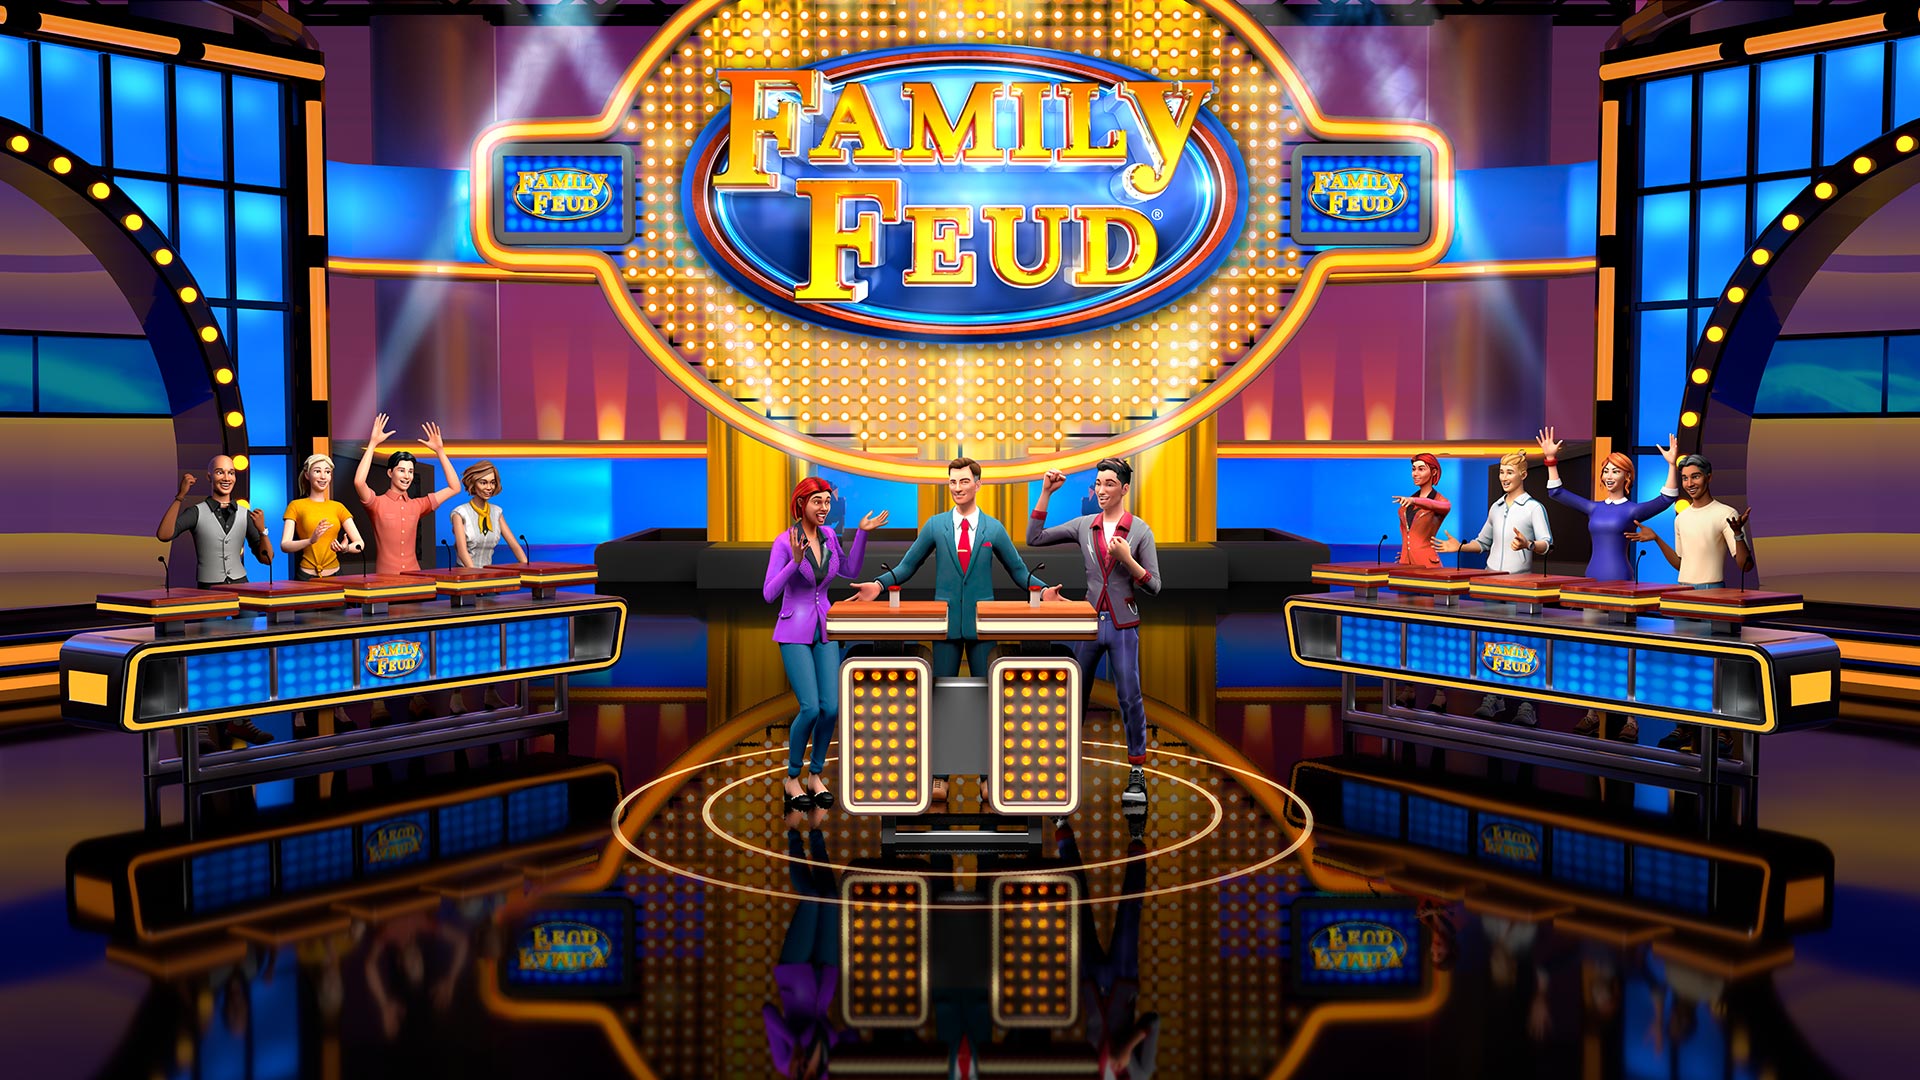 Create Family Feud Game Computer The Rules Of The Family Feud Game